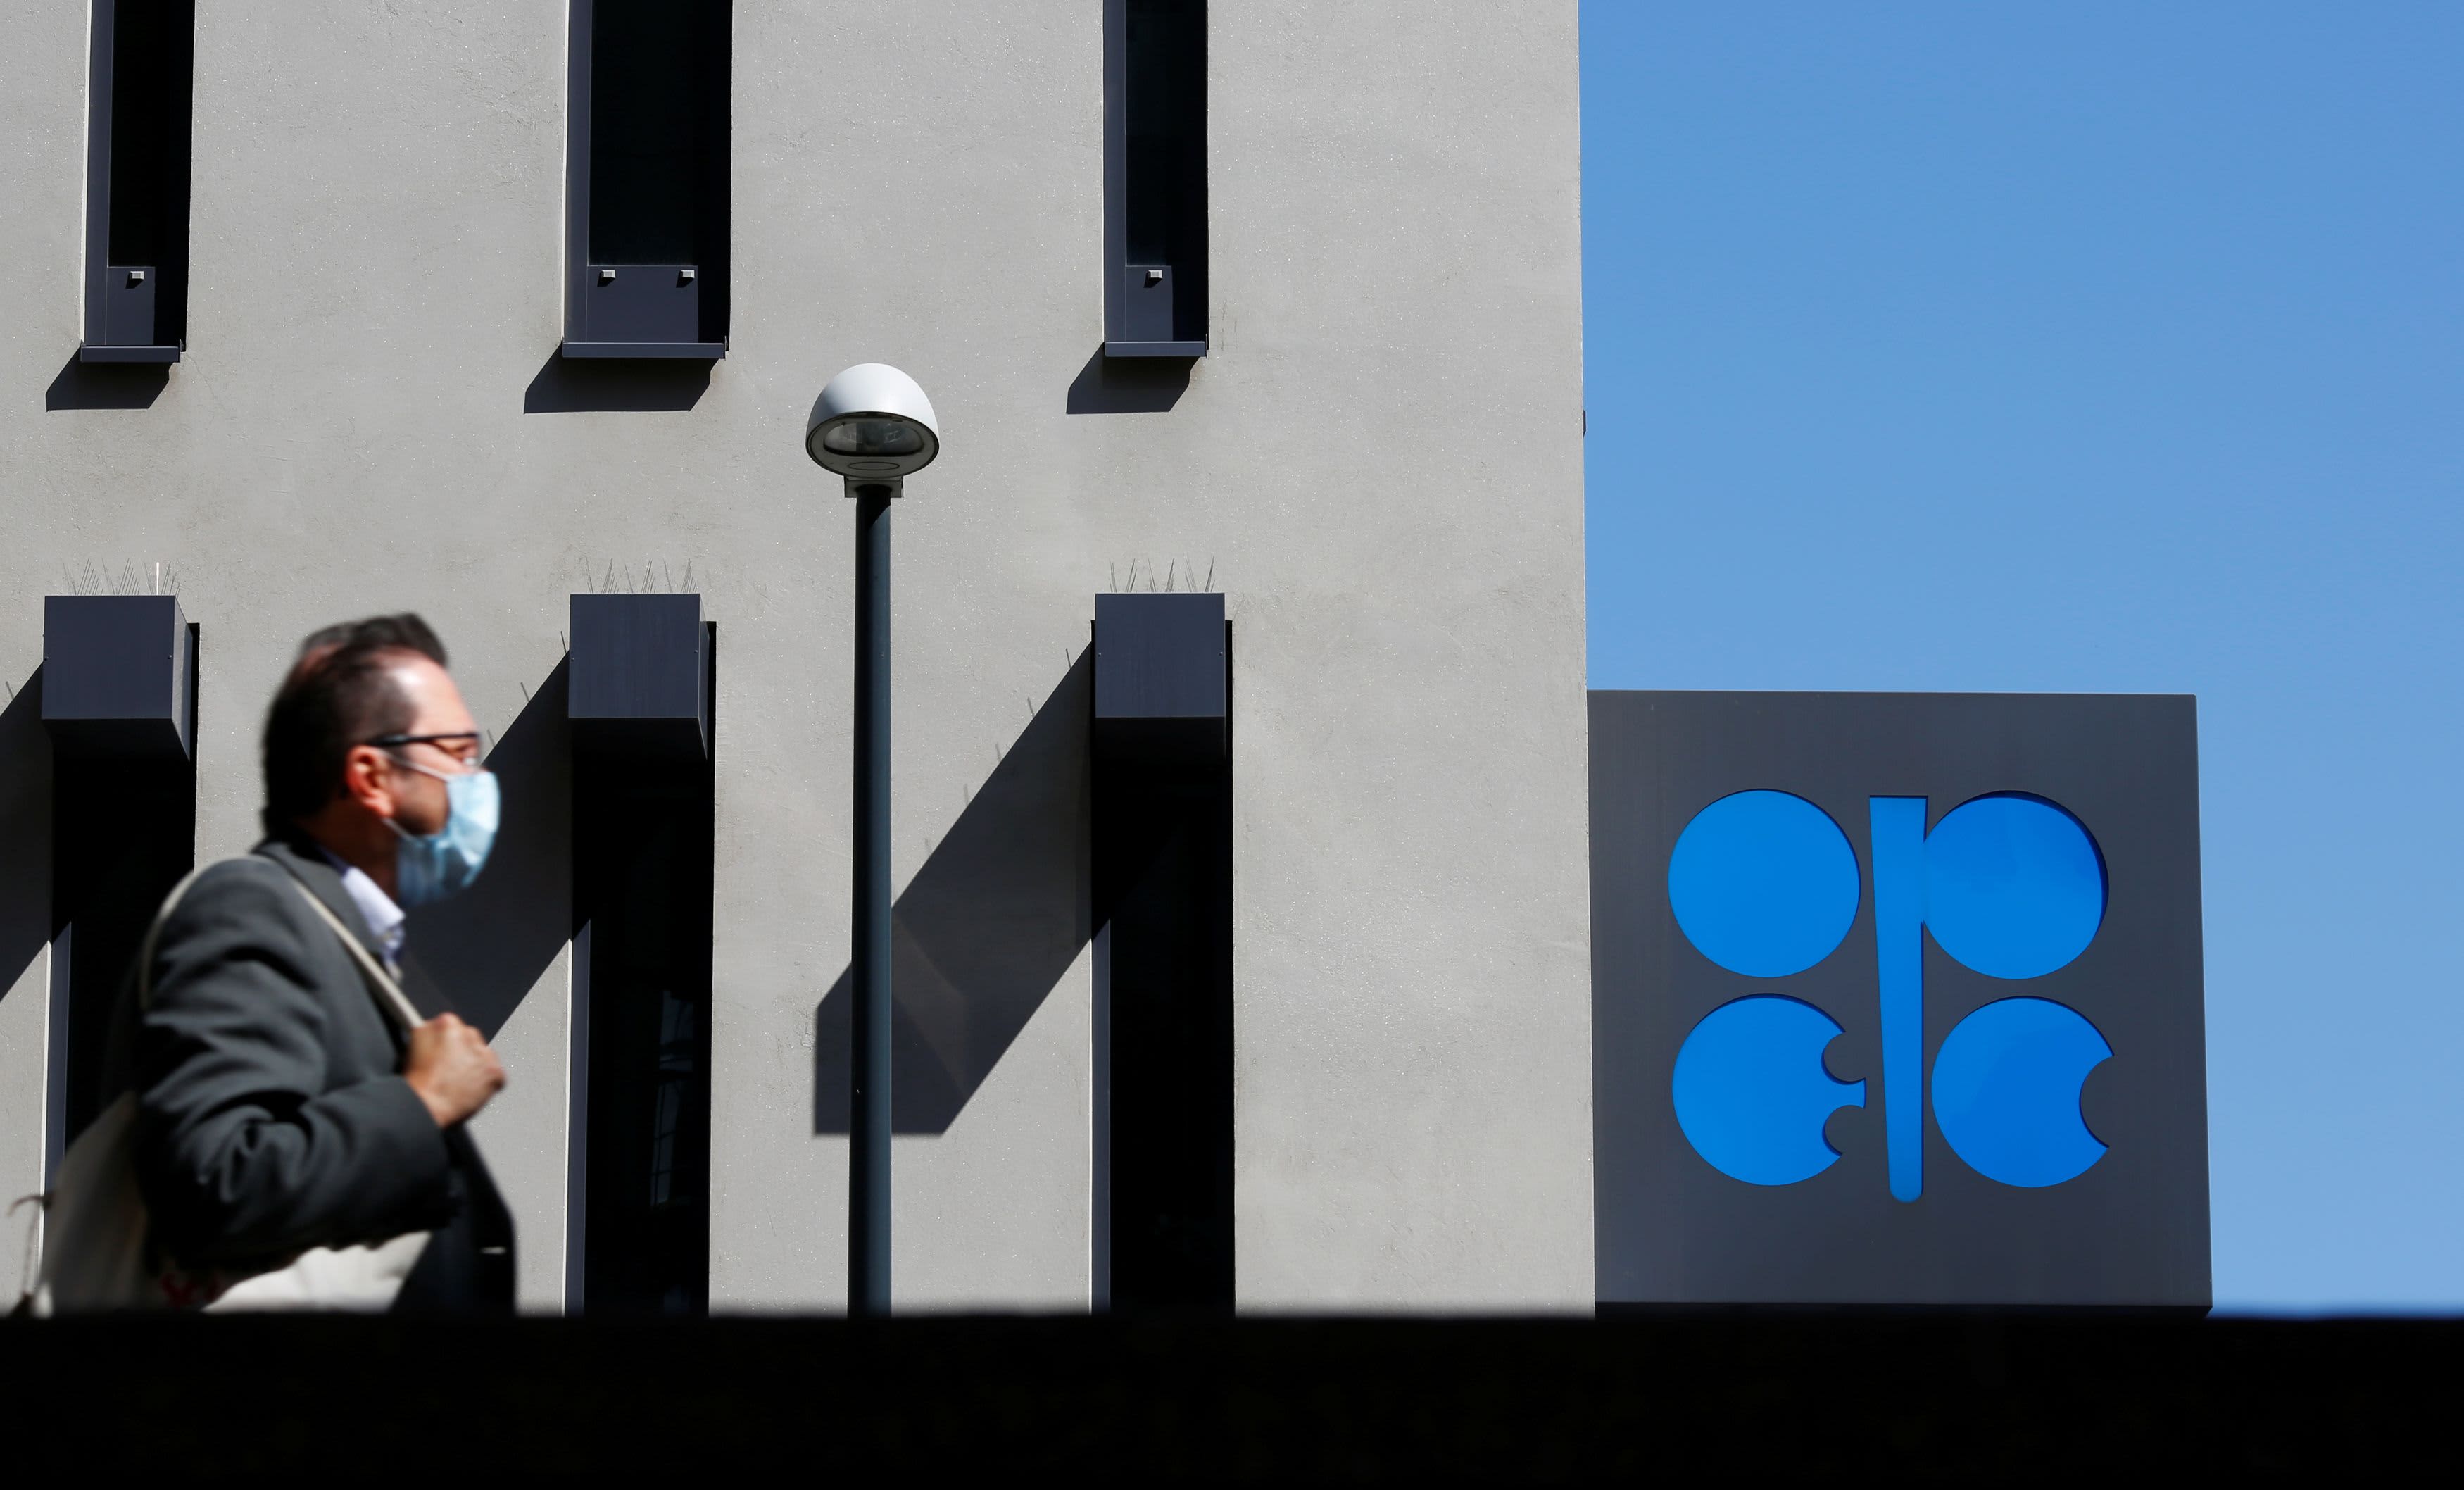 After OPEC failed to reach an agreement, oil prices hit a six-year high and then turned negative